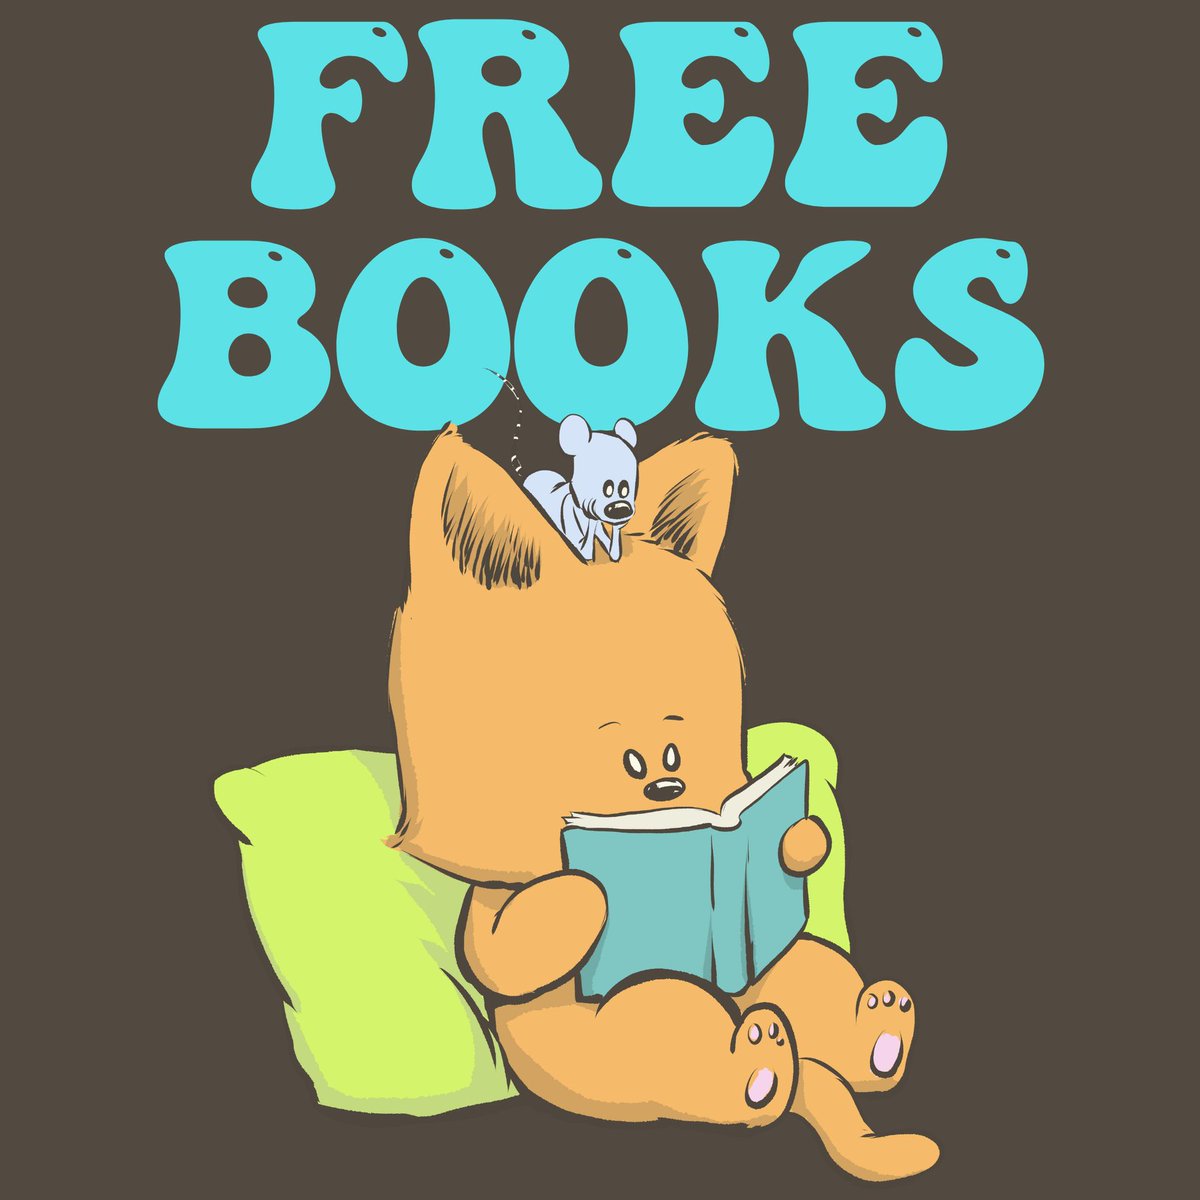 These are family-friendly books, filled with beautiful art and comics. brianandersonwriter.com/free-ebook
#getfreebook #freebooksforkids #freebook #yafiction #bookstoread #indieauthor #freebooks #freecomicbookday